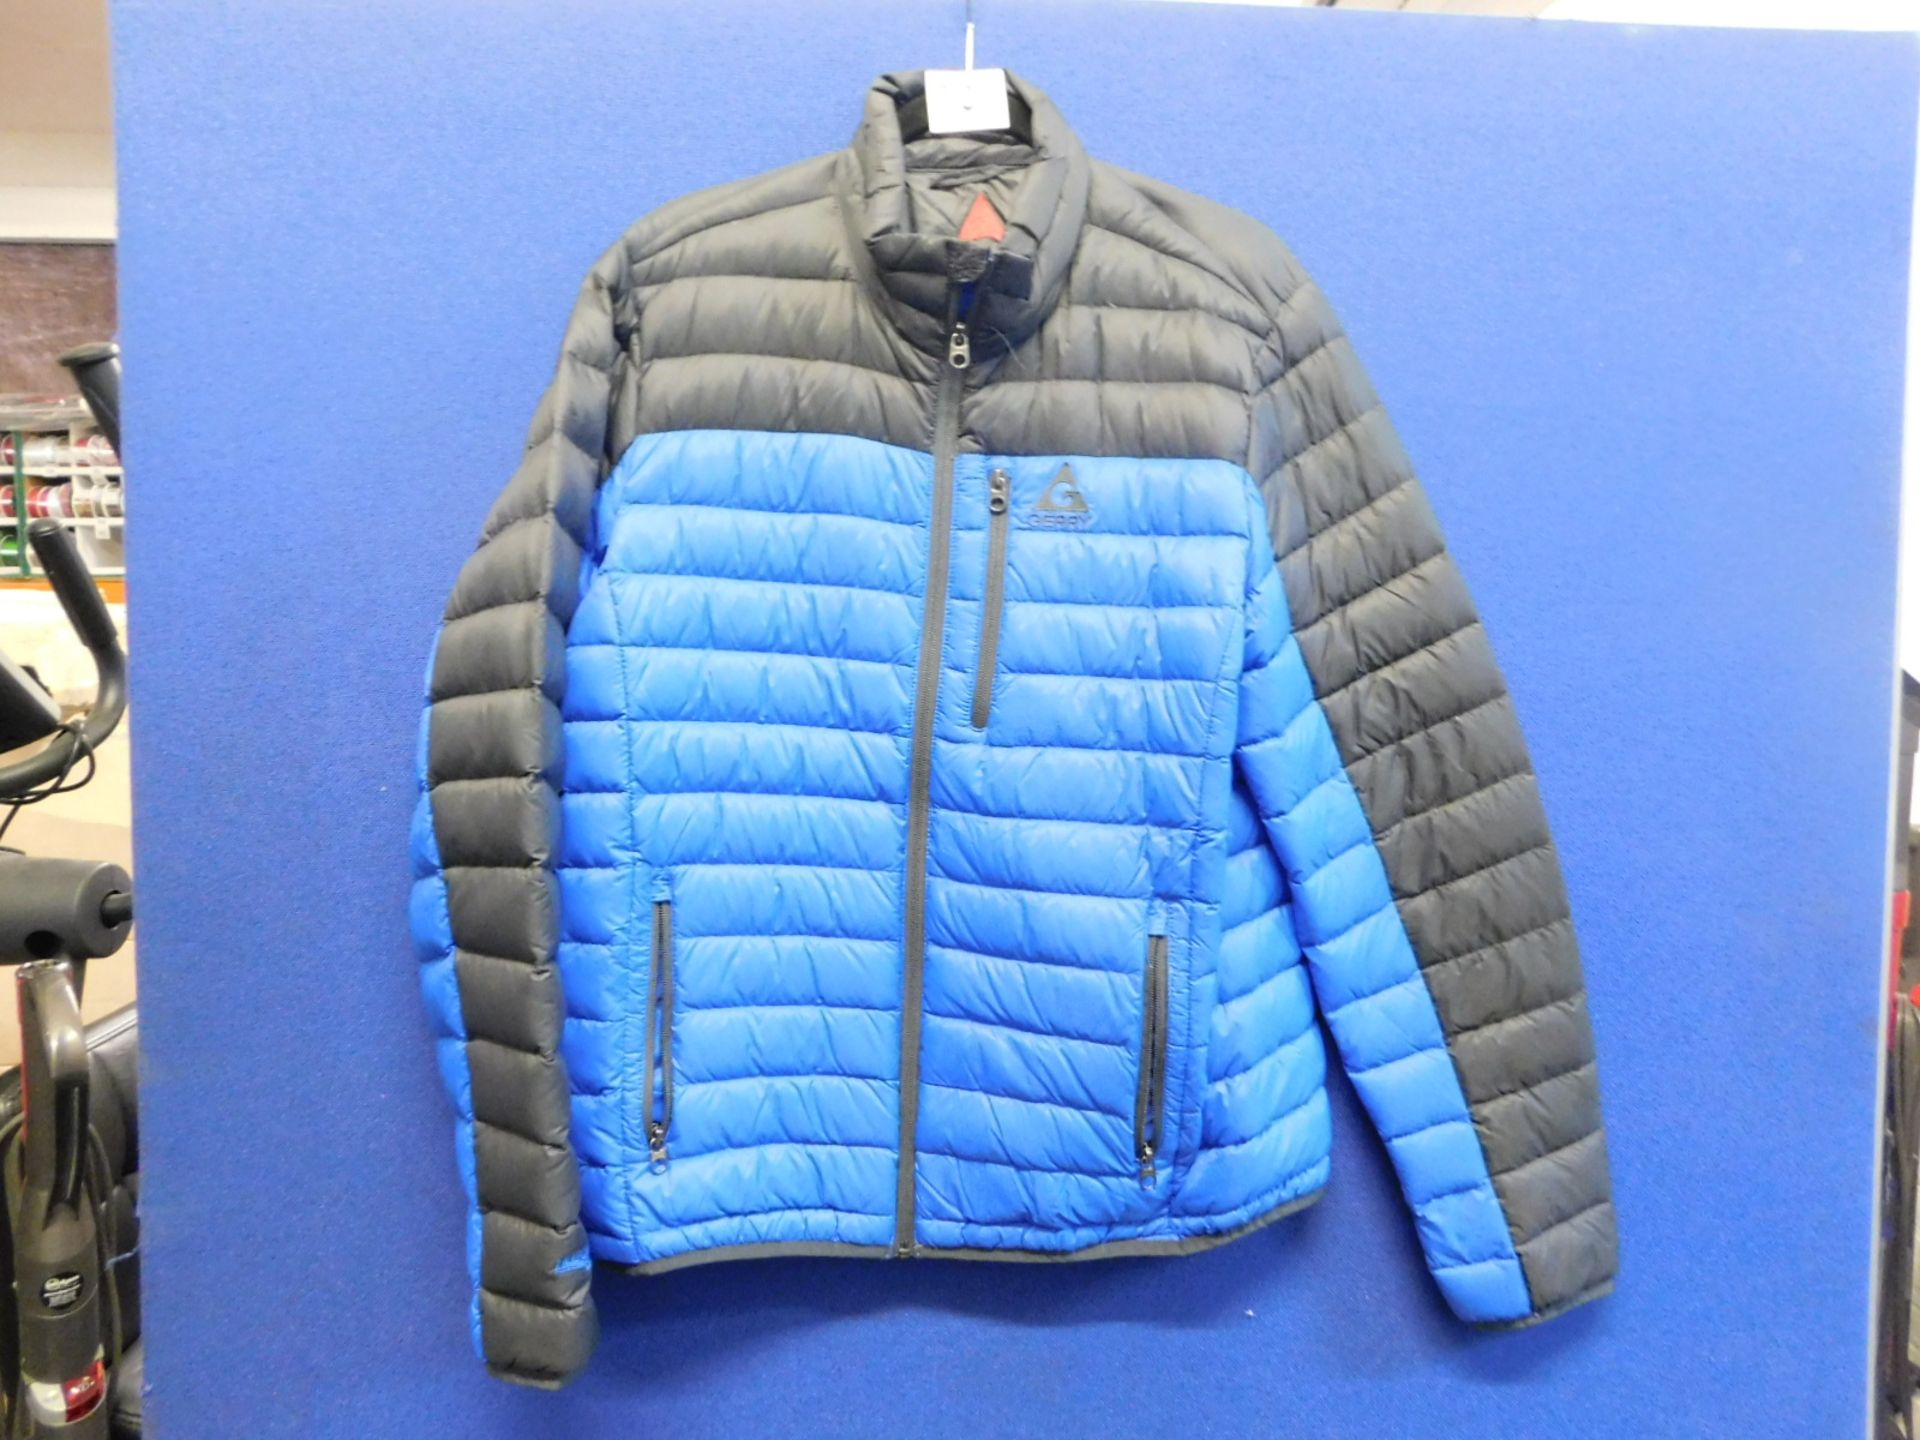 1 GERRY BLUE & GREY PADDED LIGHTWEIGHT JACKET SIZE M RRP £59.99